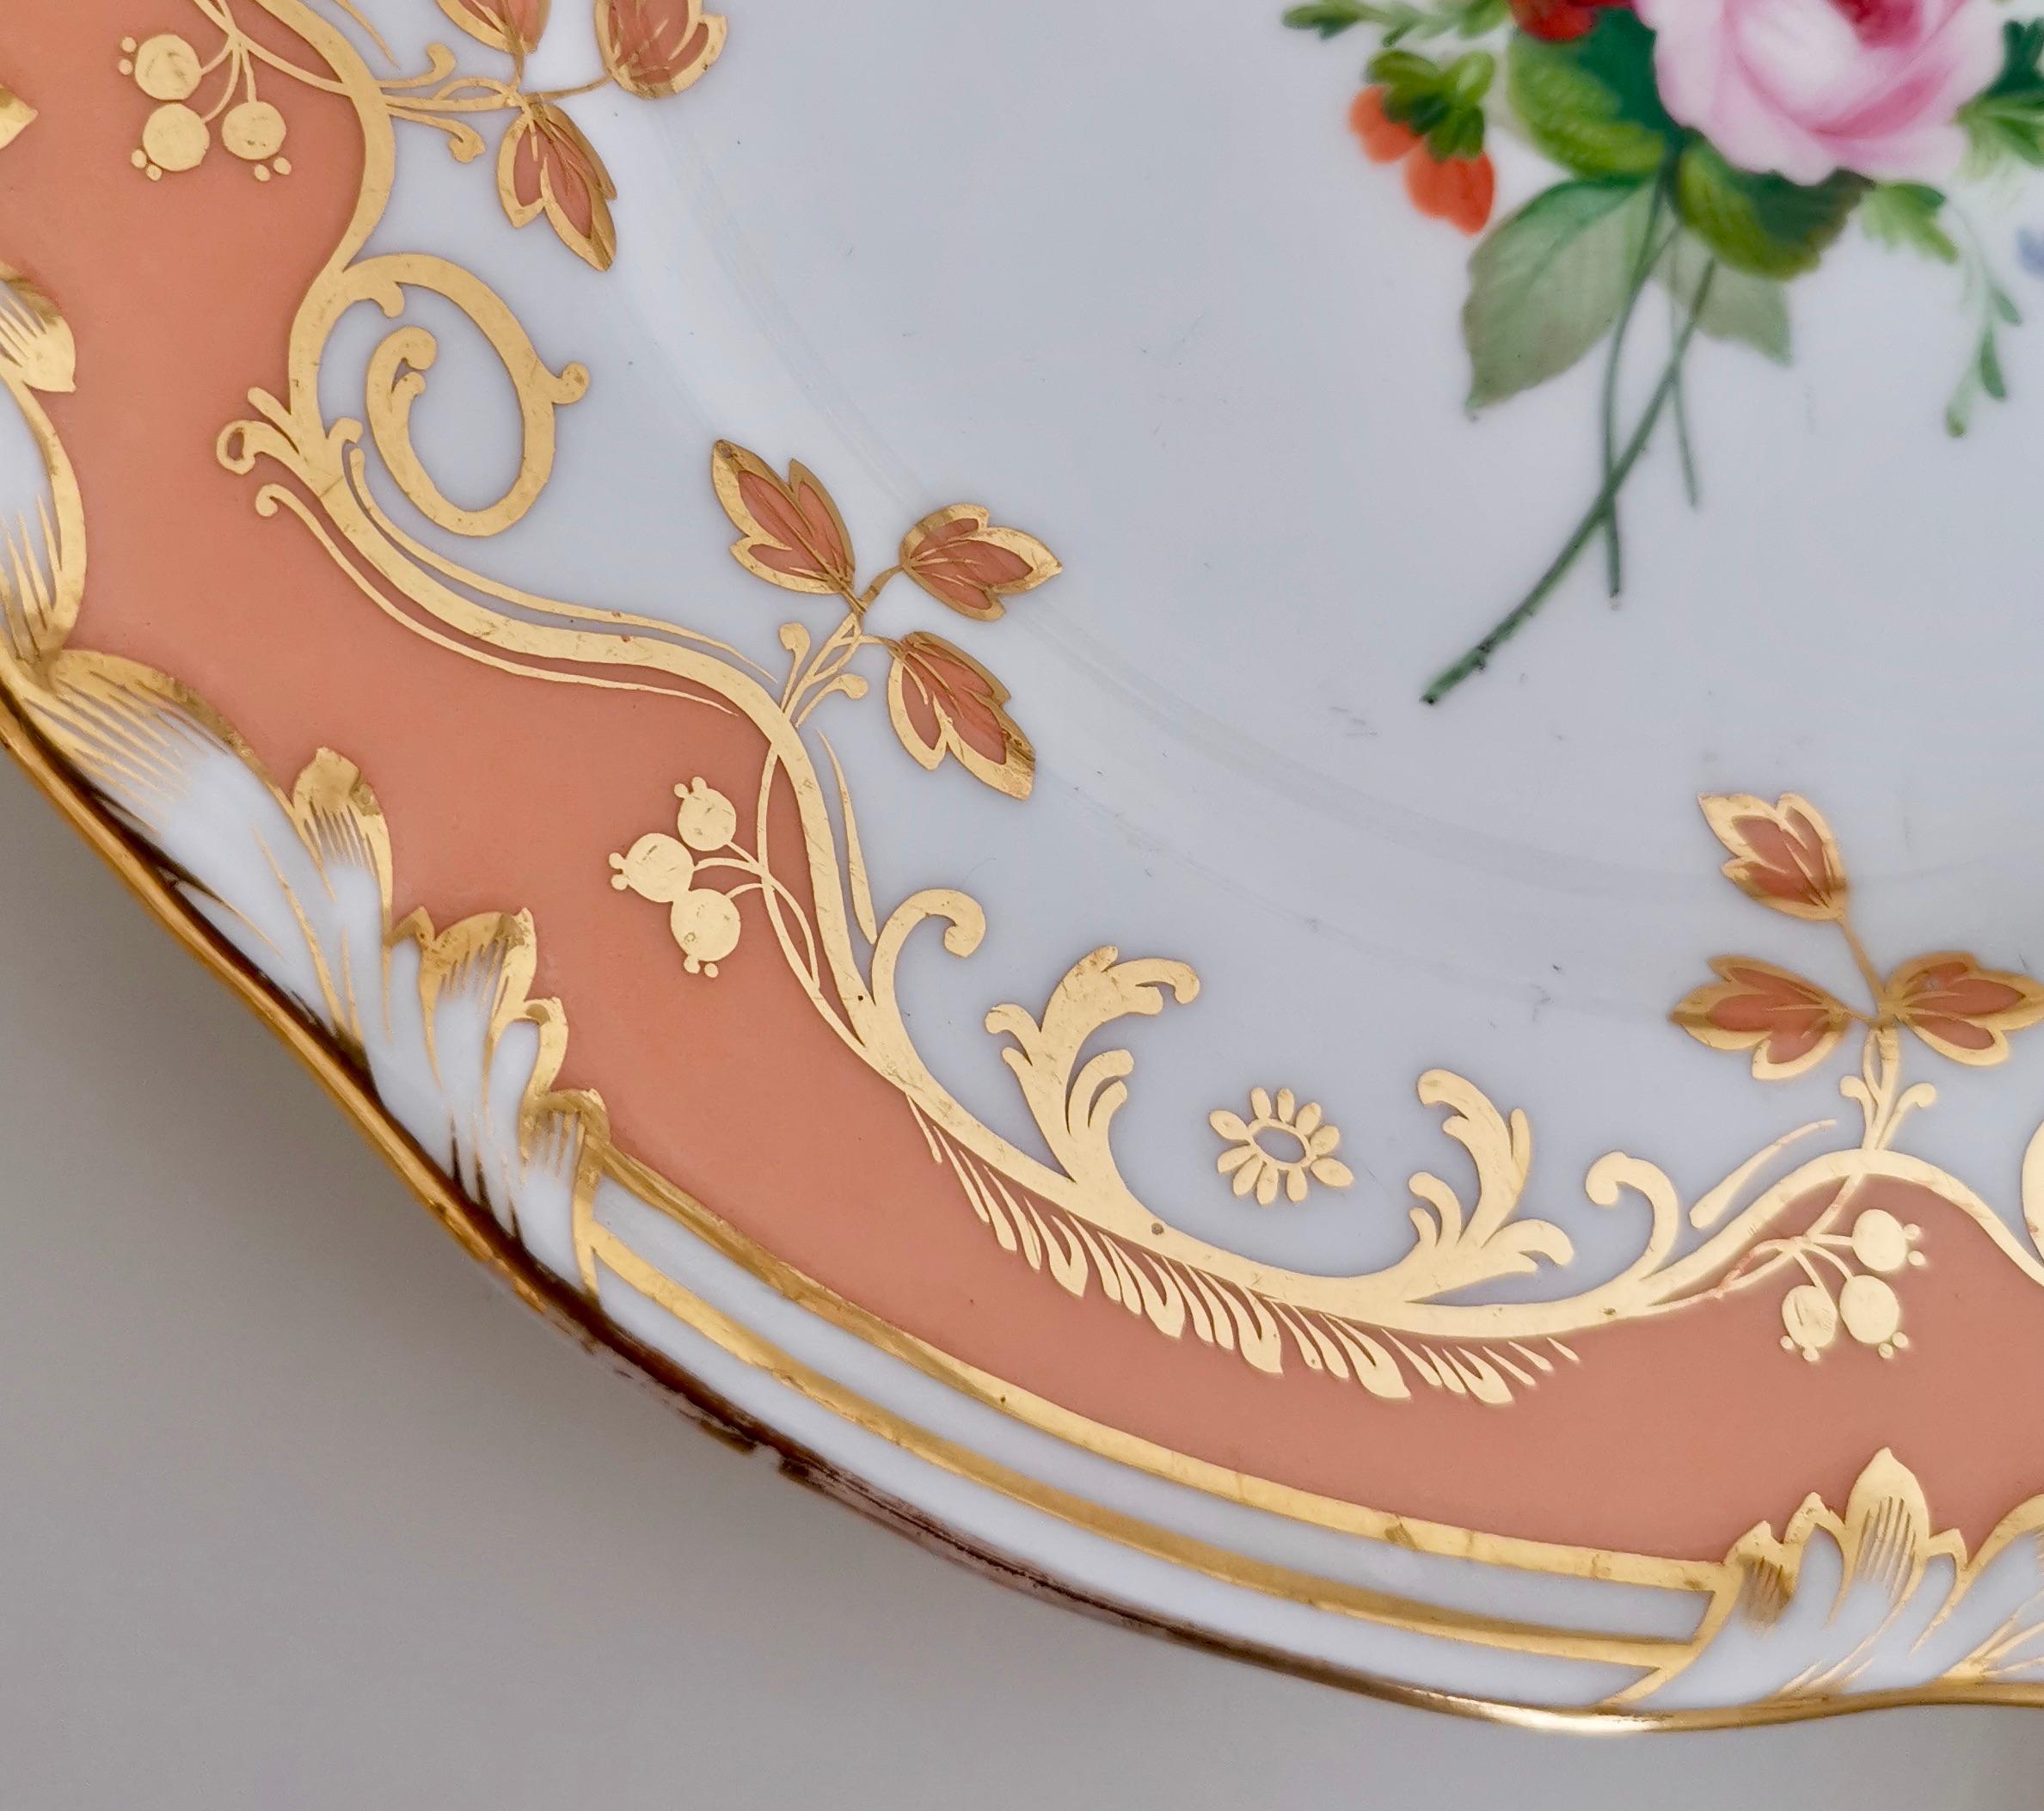 Mid-19th Century Coalport Porcelain Plate, Peach Ground and Flowers by Thomas Dixon, '1'